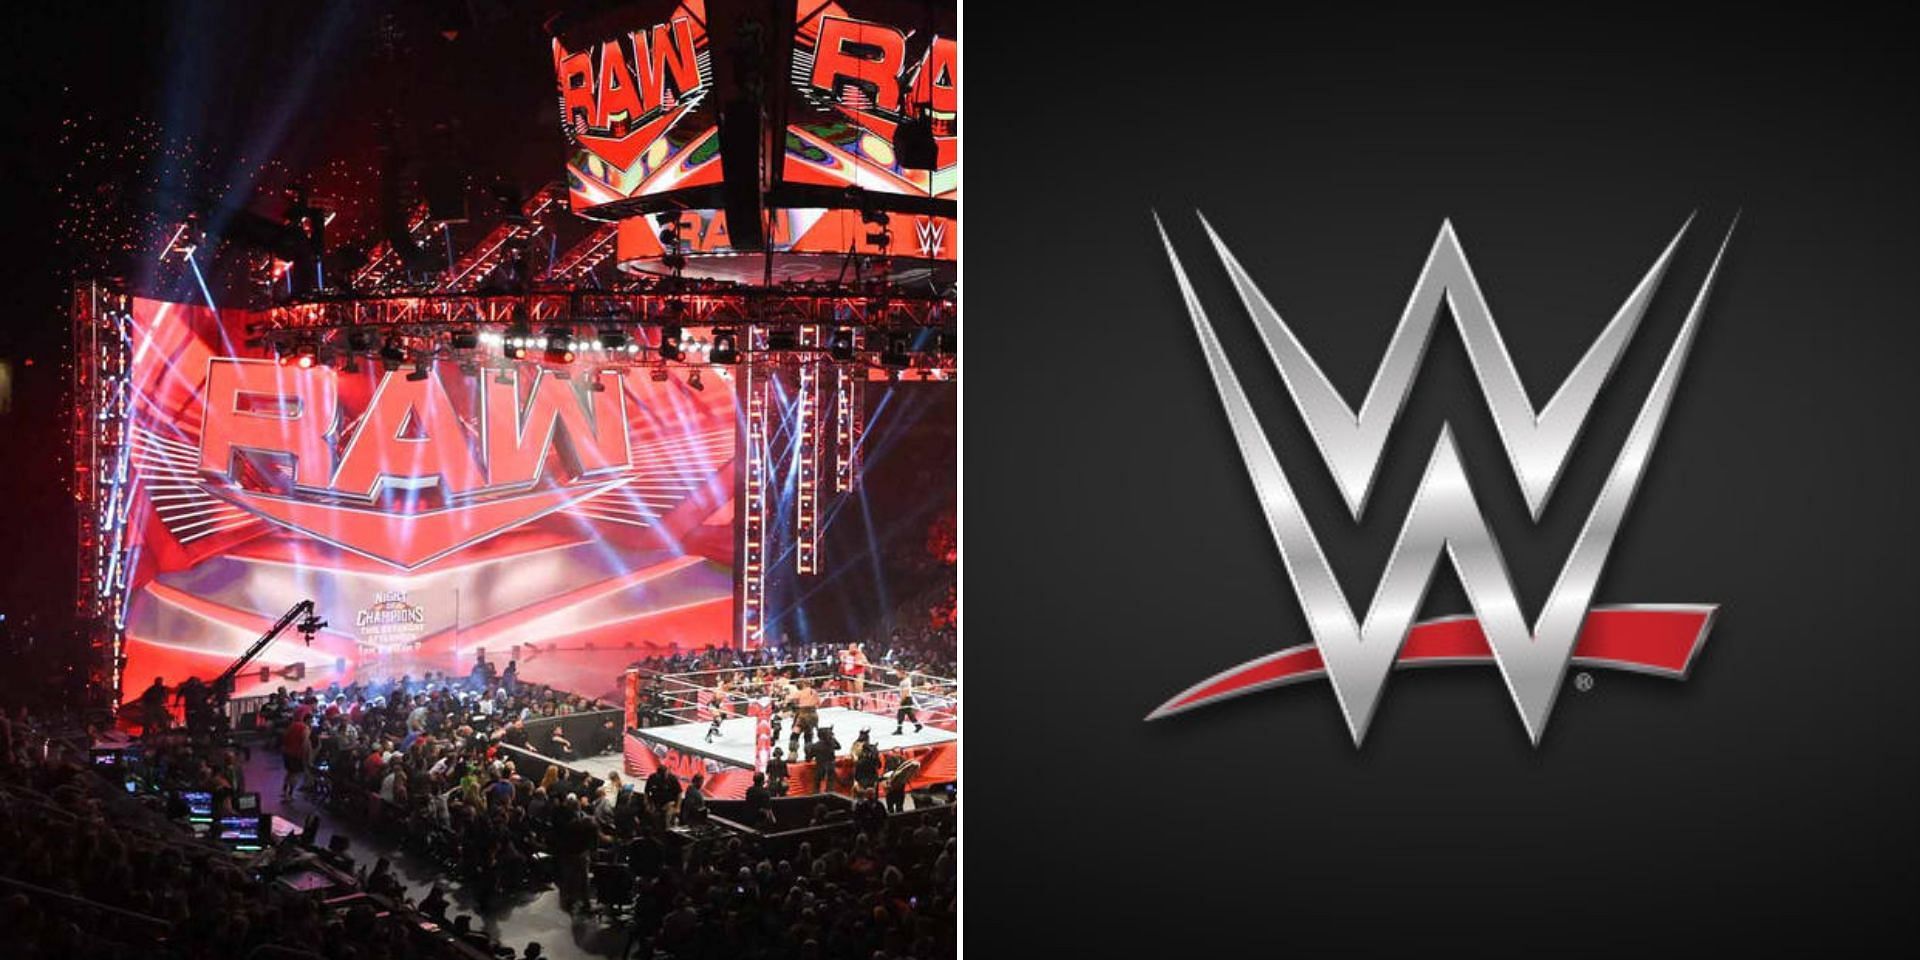 A major title match was announced on RAW this week